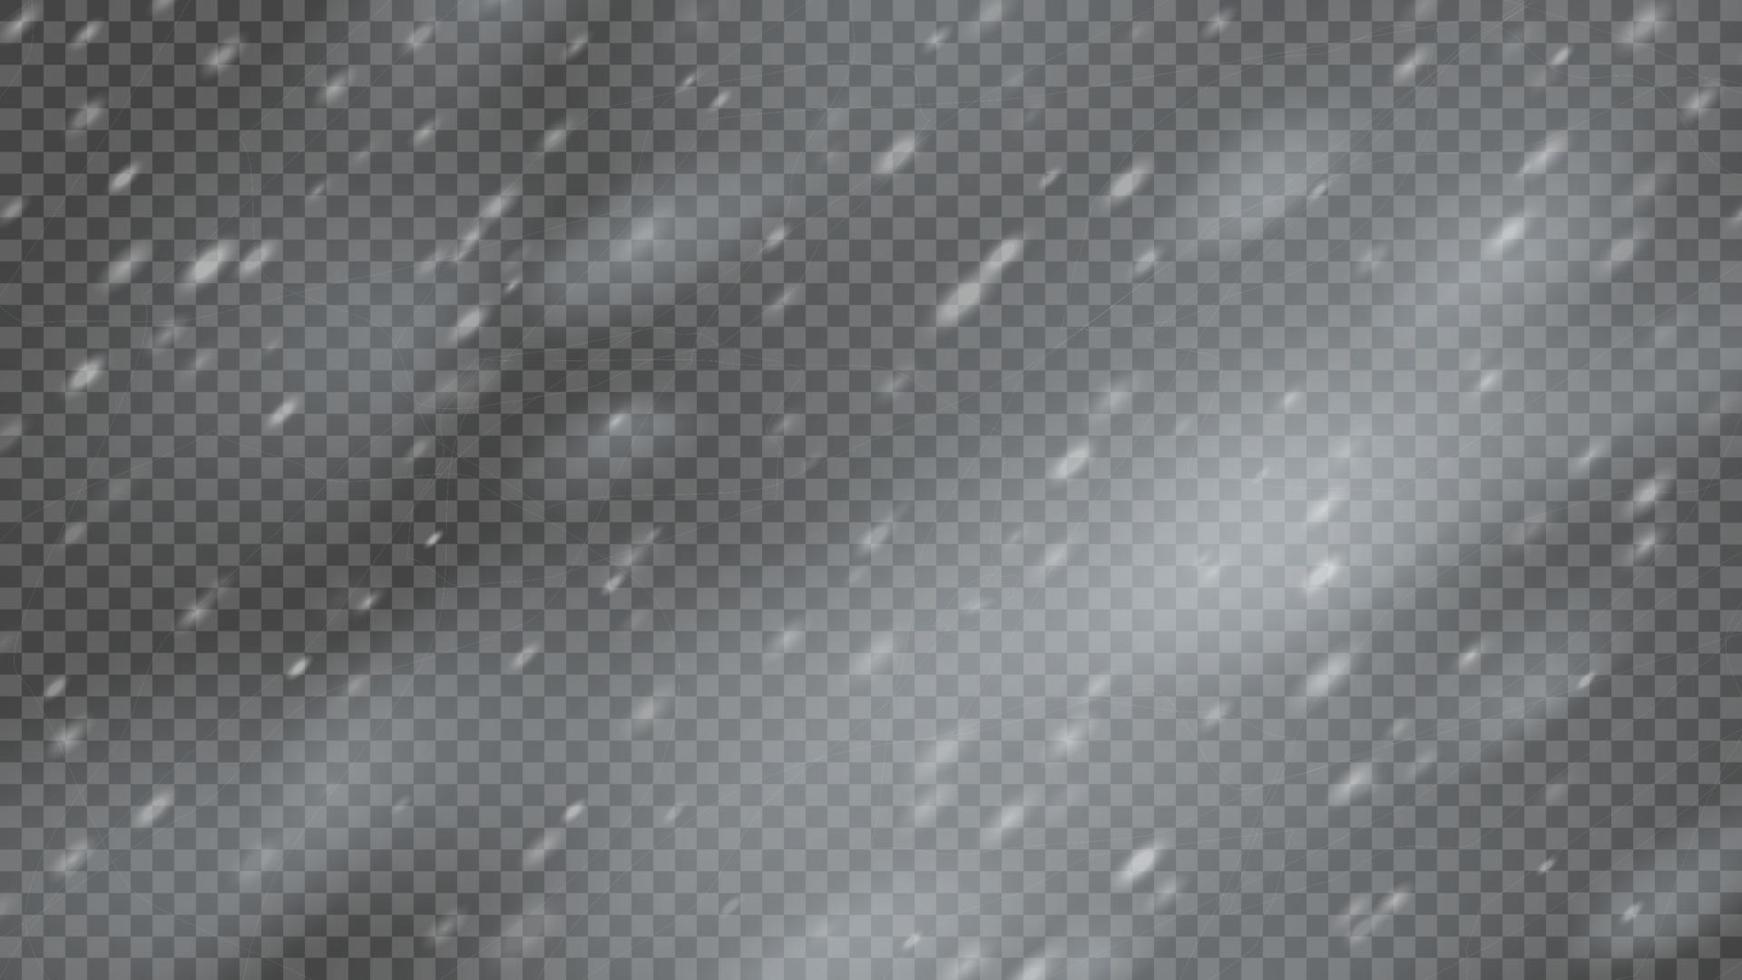 Snowstorm and falling snowflakes vector